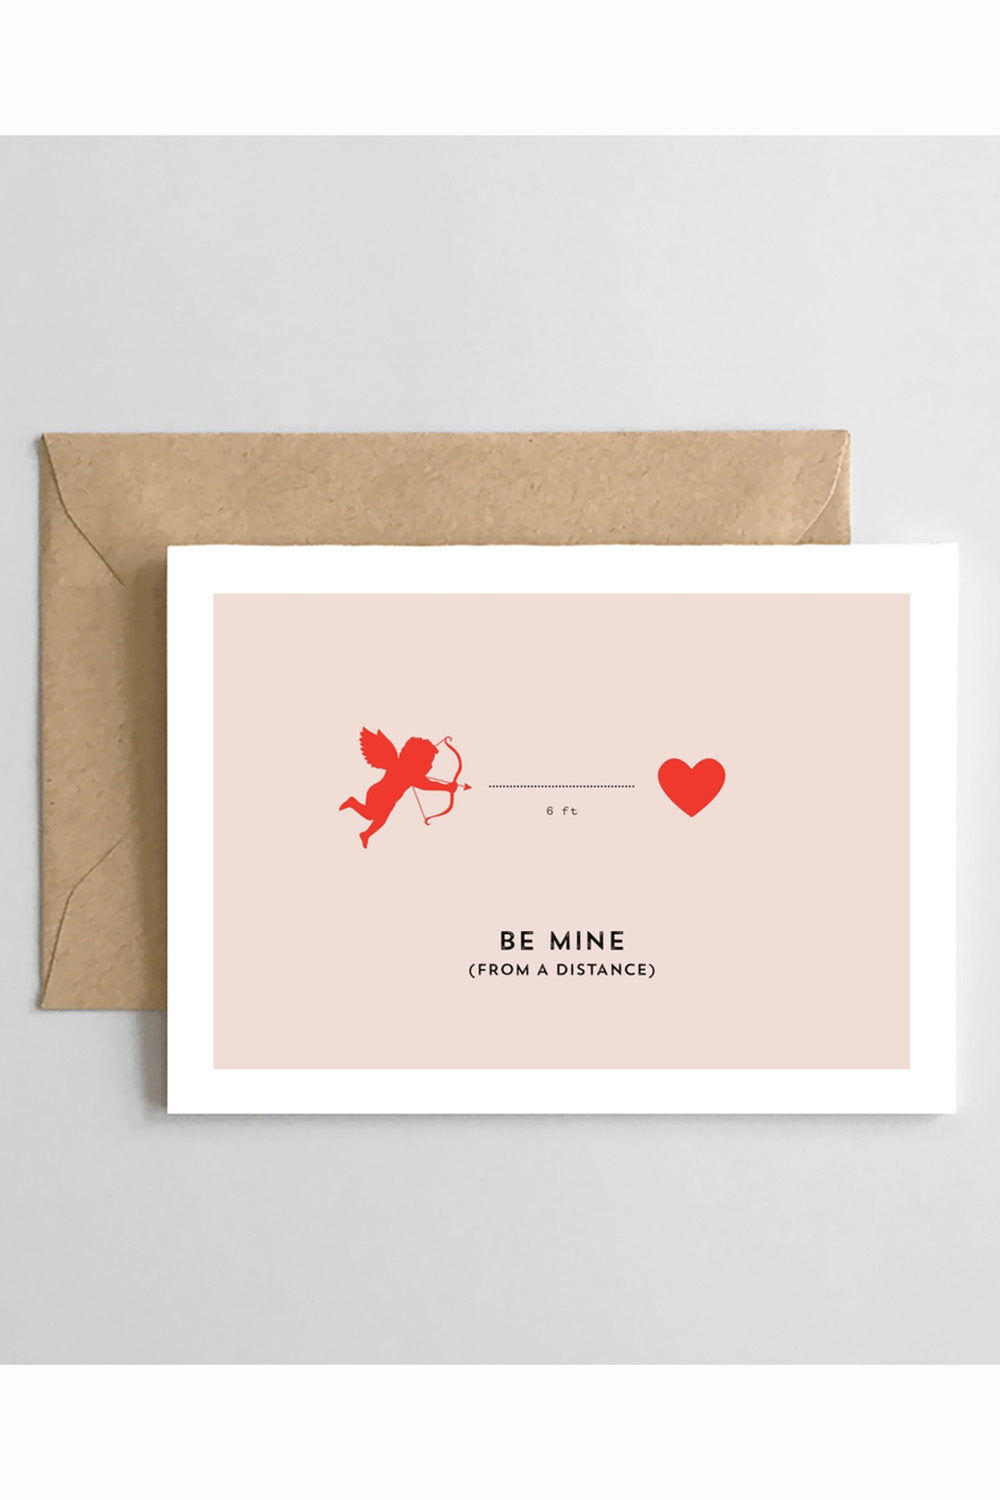 SIDEWALK SALE ITEM - Clever Valentine Greeting Card - Be Mine (from a distance)